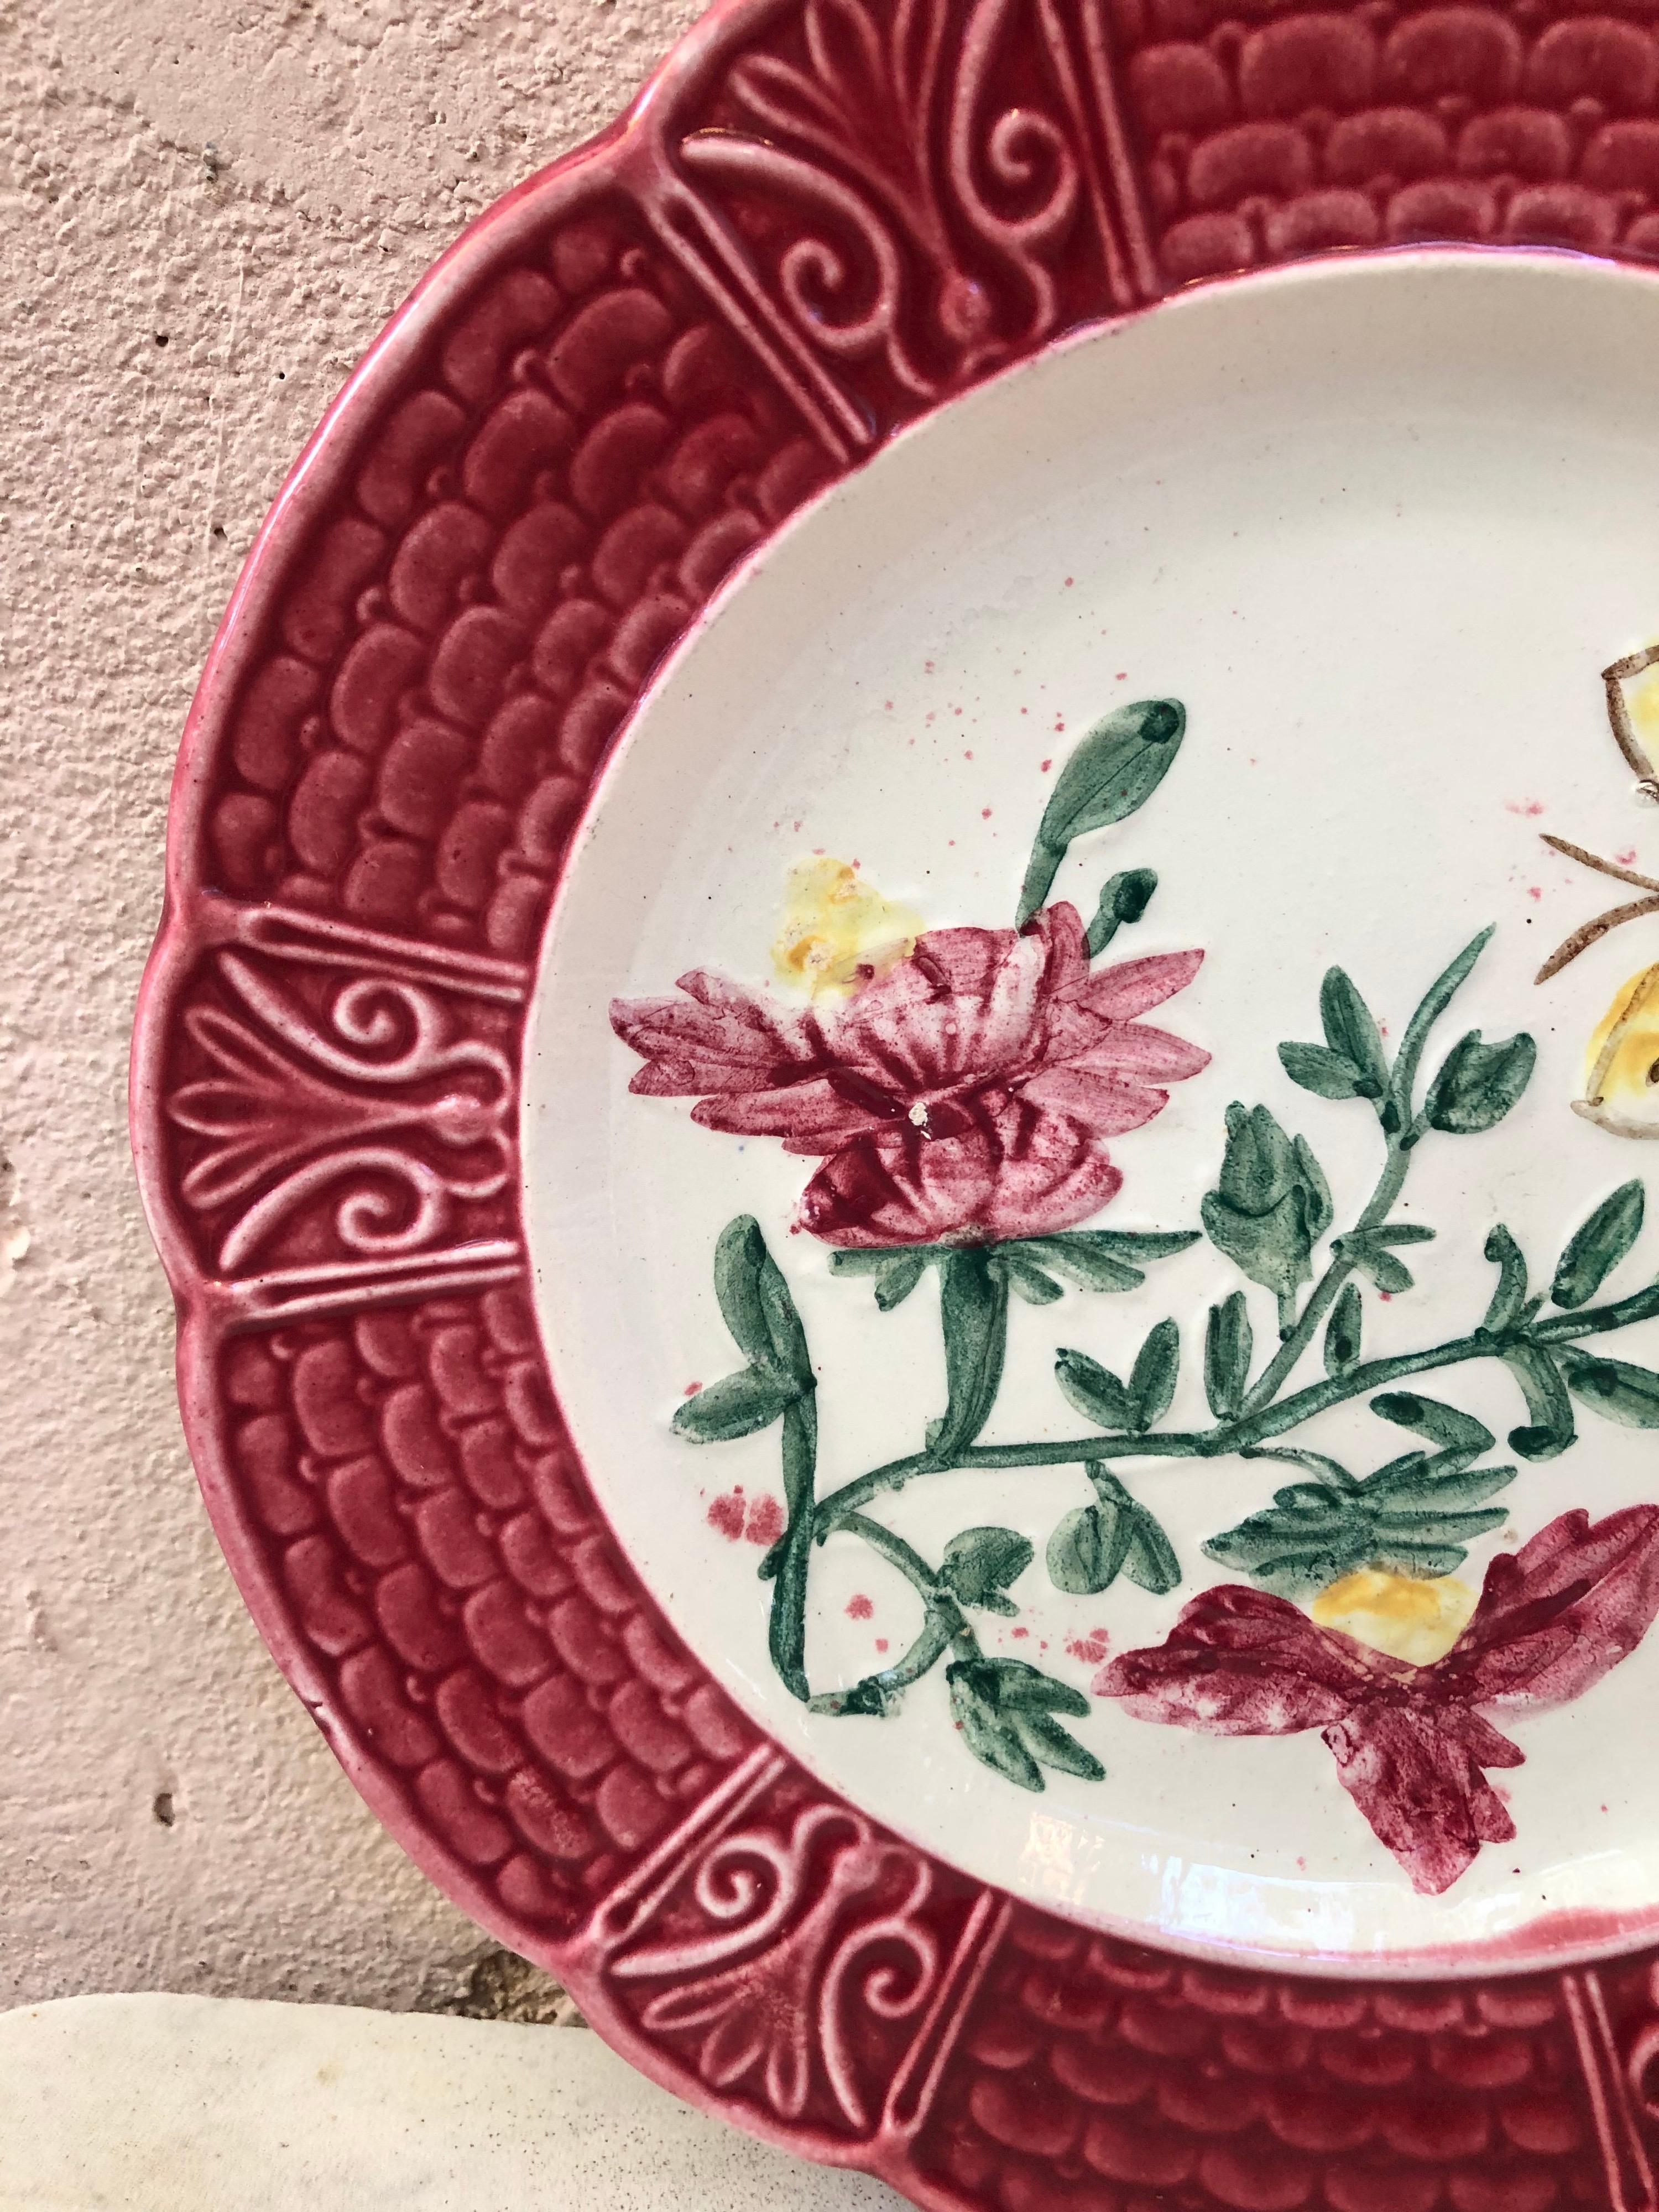 Rustic French Majolica Plate with Flowers & Butterfly, Circa 1900